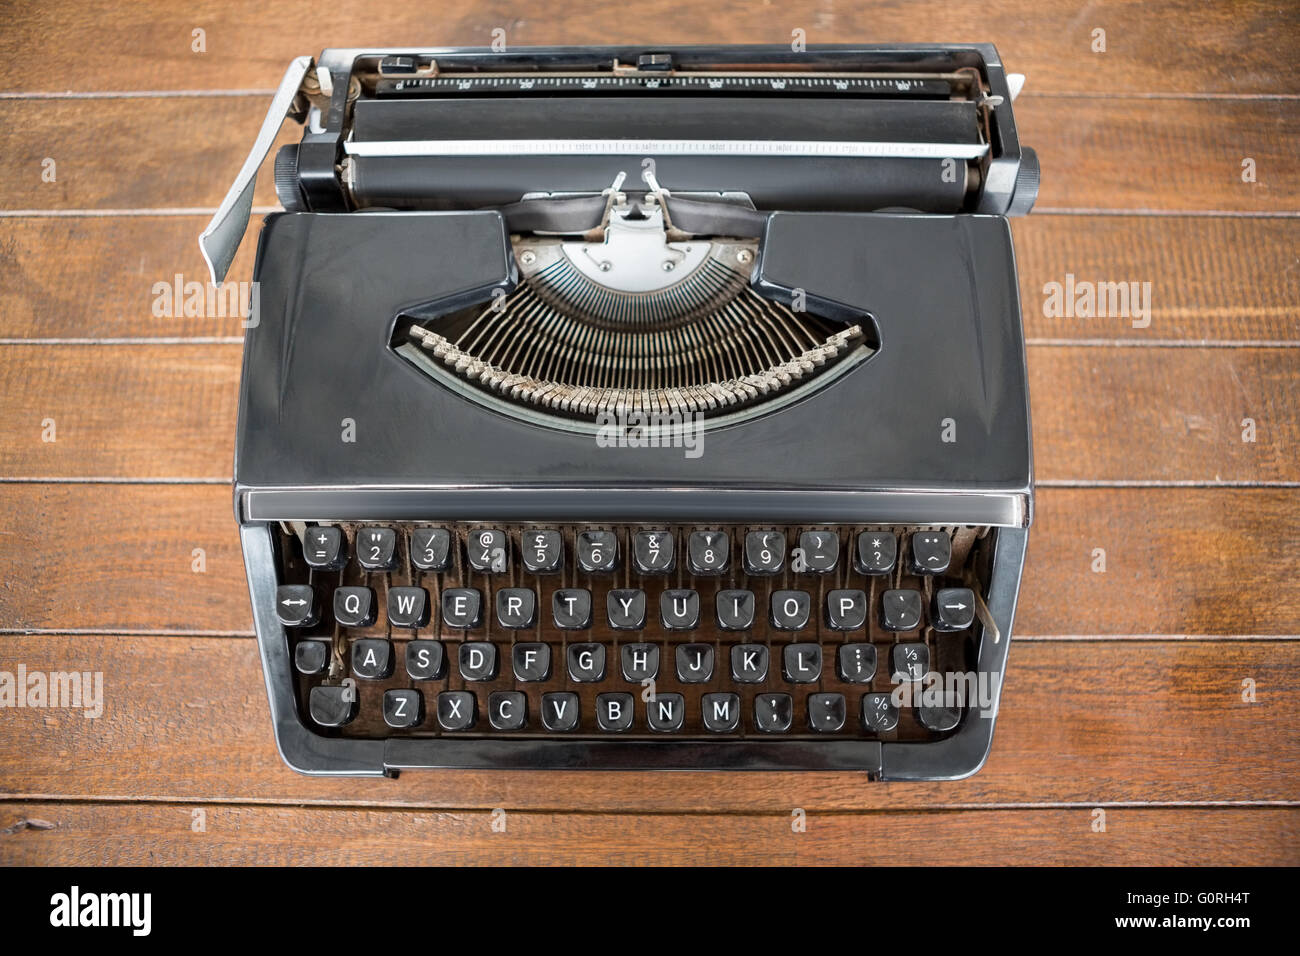 High angle view of old typewriter Stock Photo